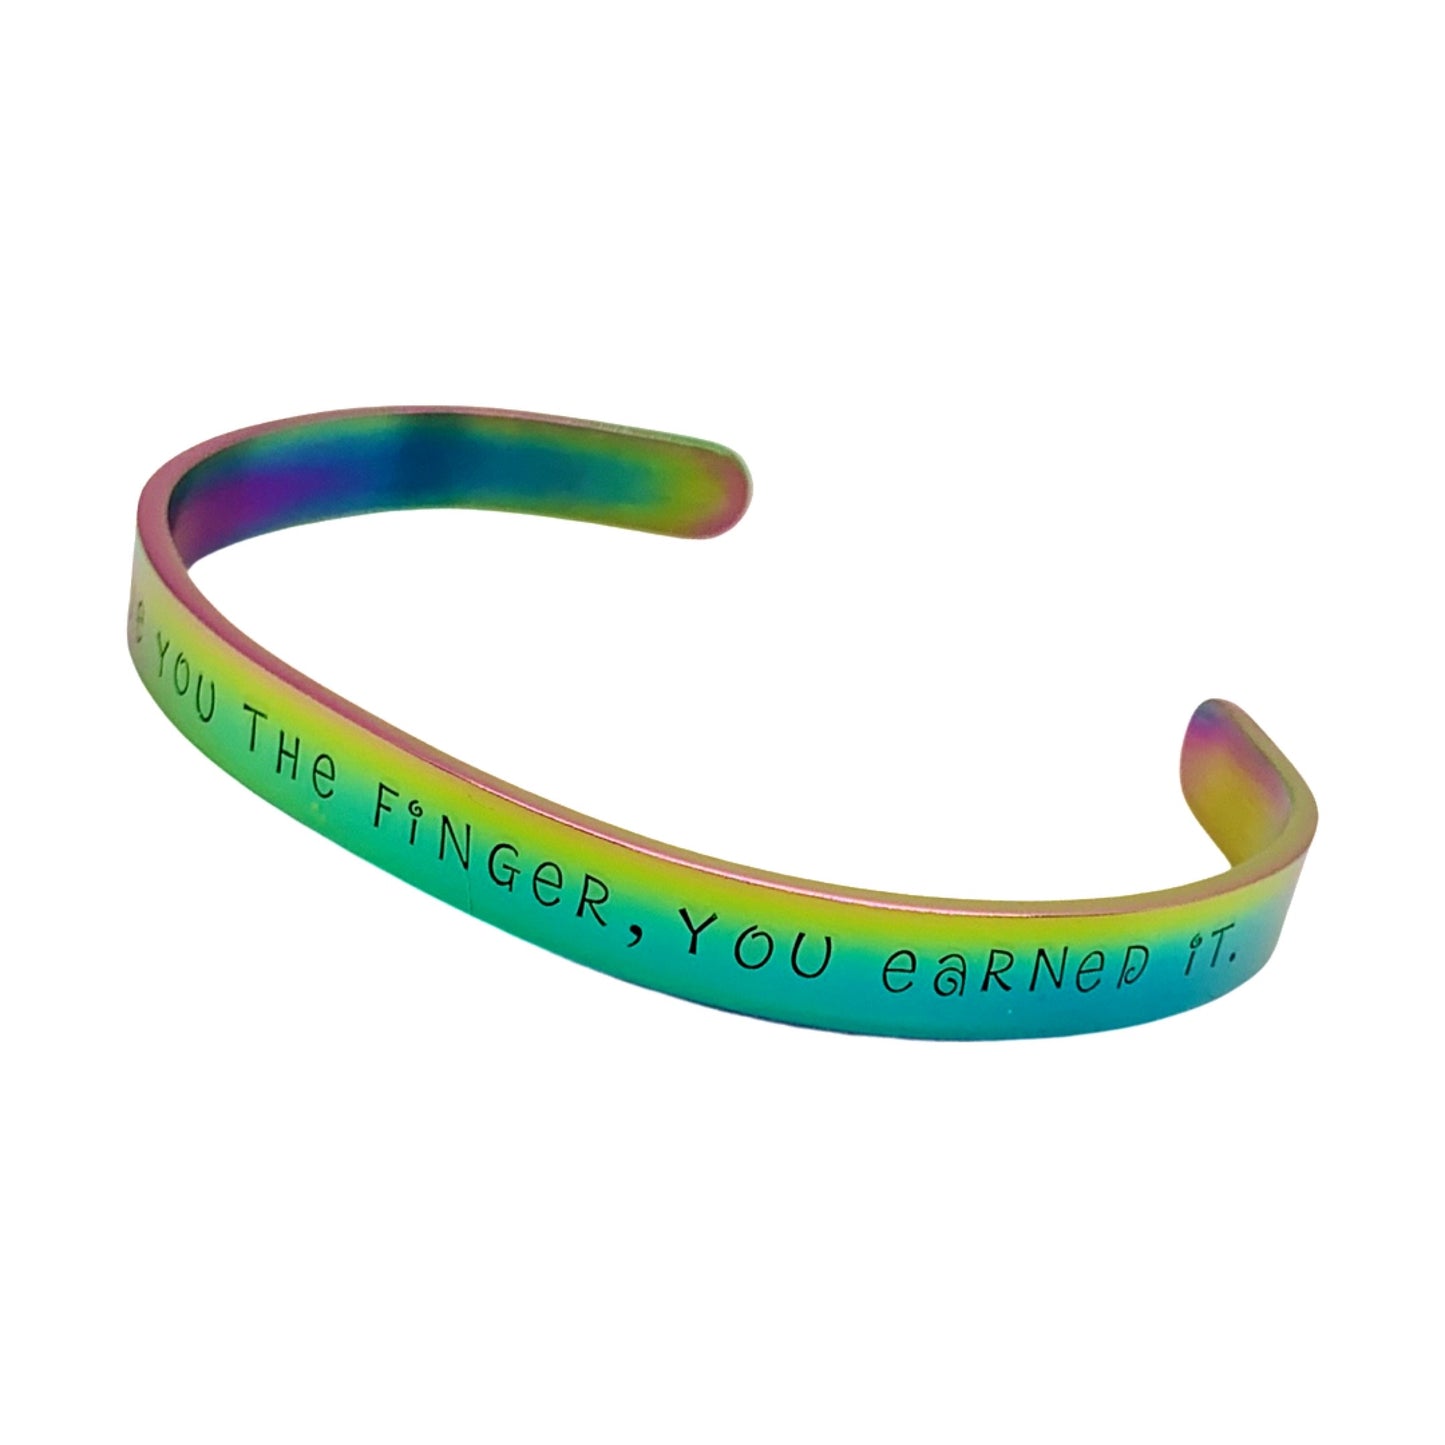 I didn't give you the finger, you earned it - Cuff Bracelet